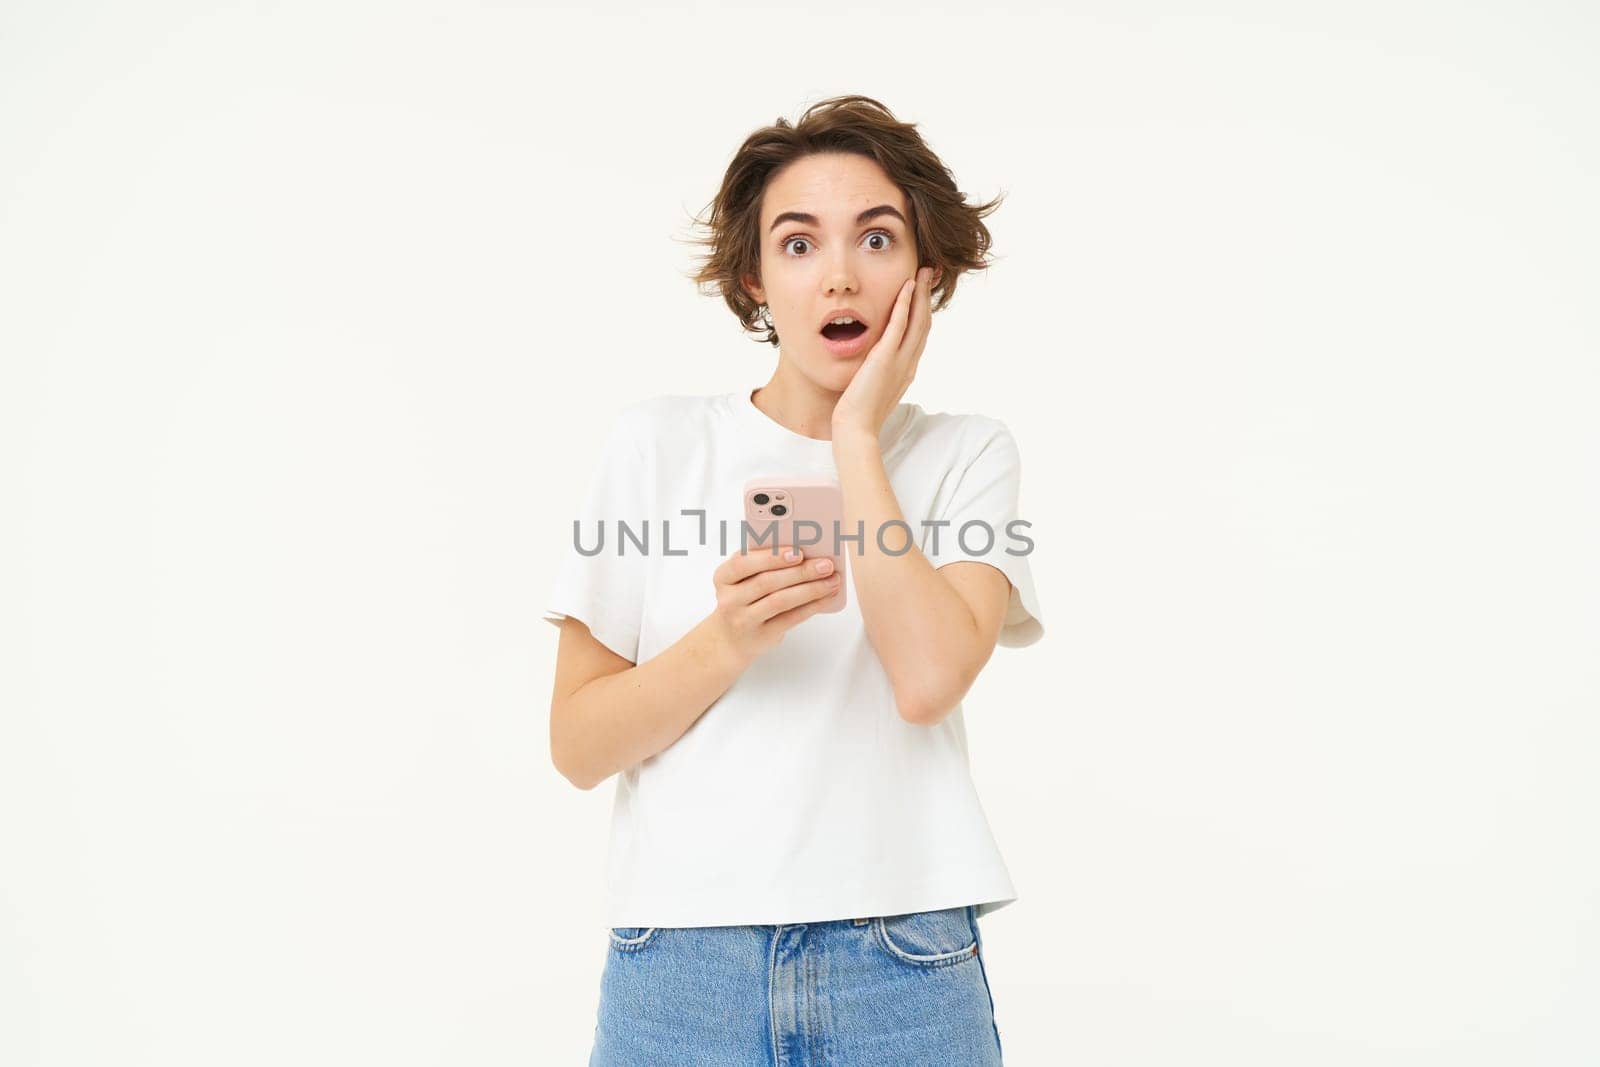 Portrait of shocked young woman with smartphone, drops jaw and says wow, reads big news on mobile phone app, isolated over white background.